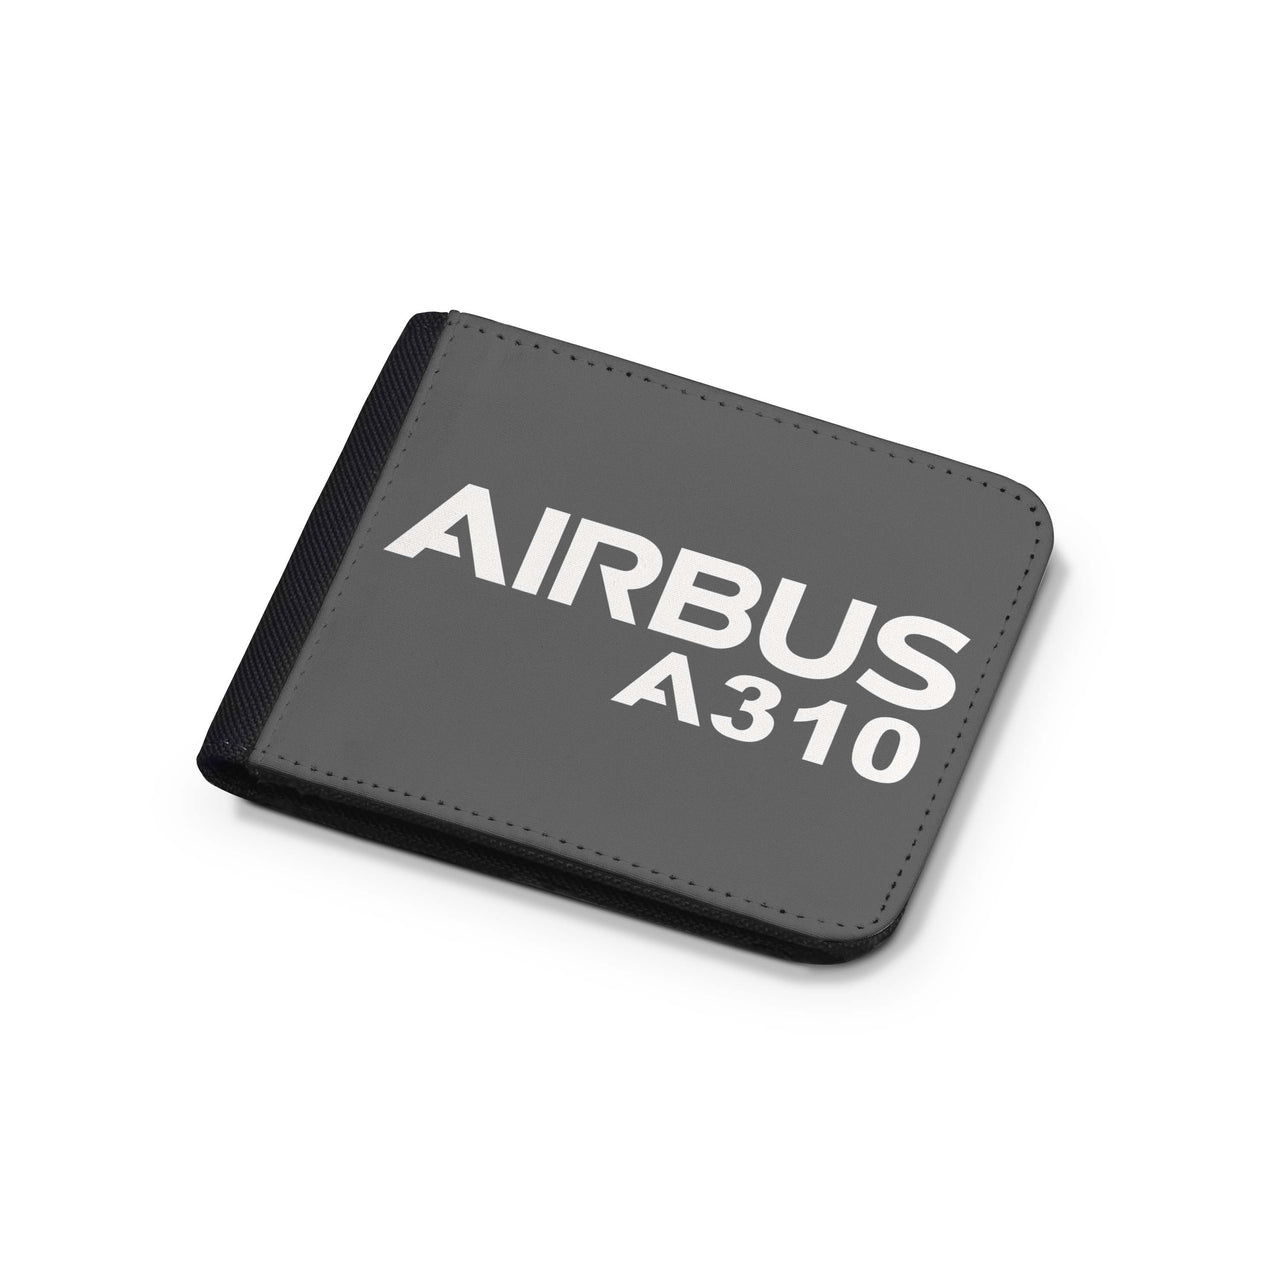 Airbus A310 & Text Designed Wallets